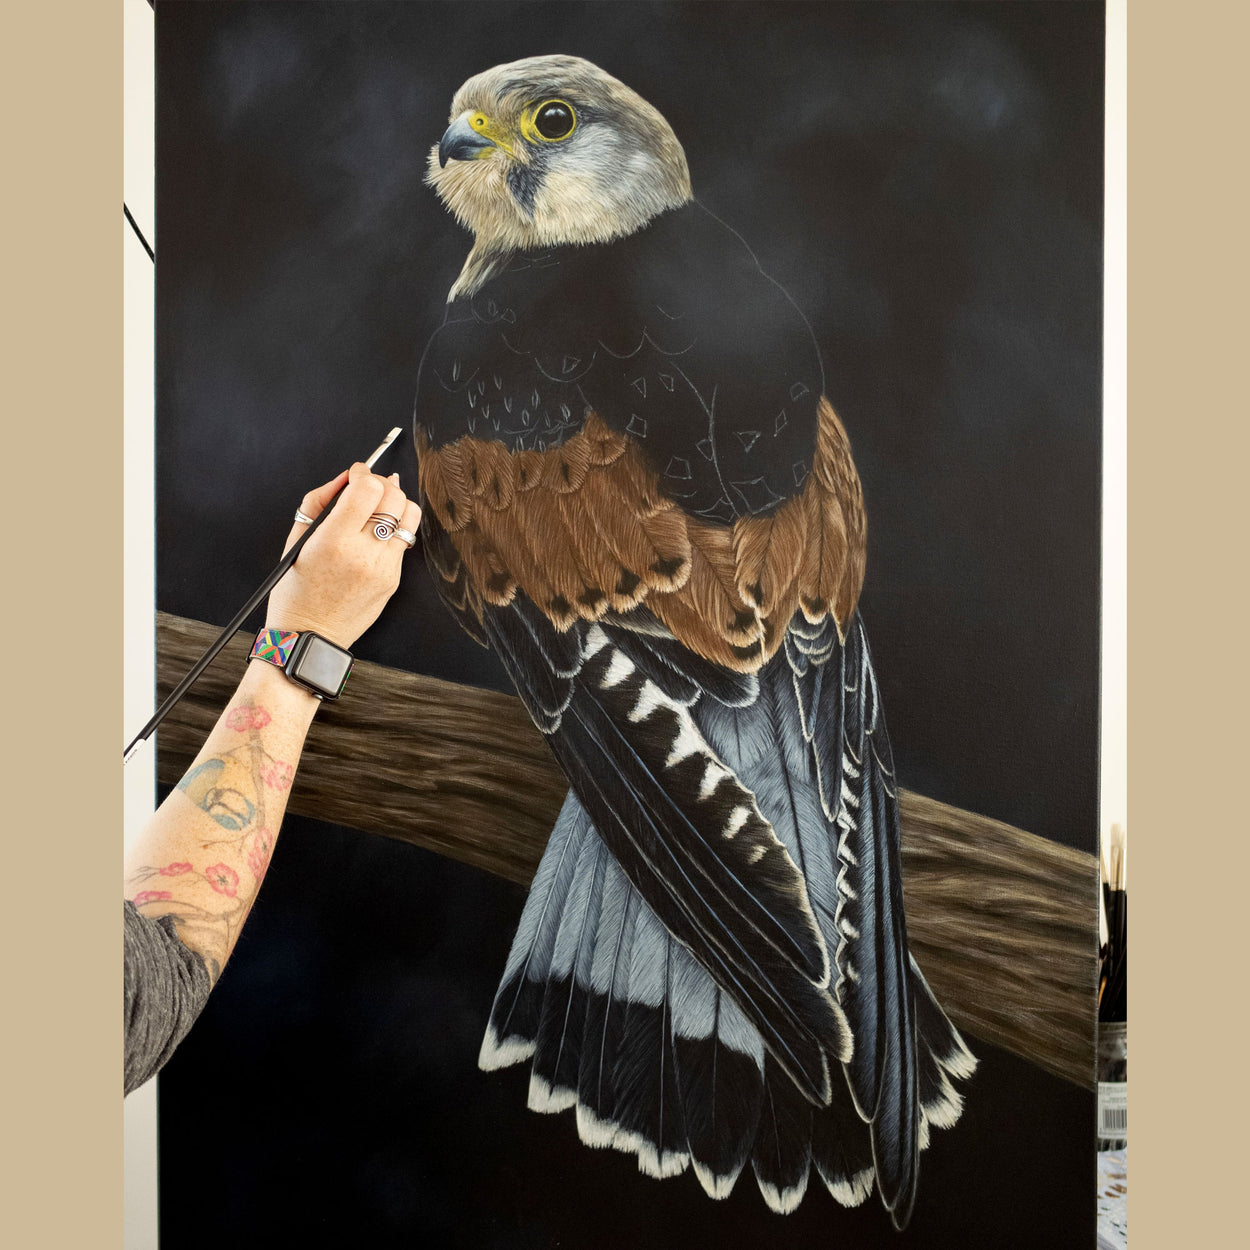 Imaging showing an arm holding a paintbrush over a part-completed painting of a male common kestrel